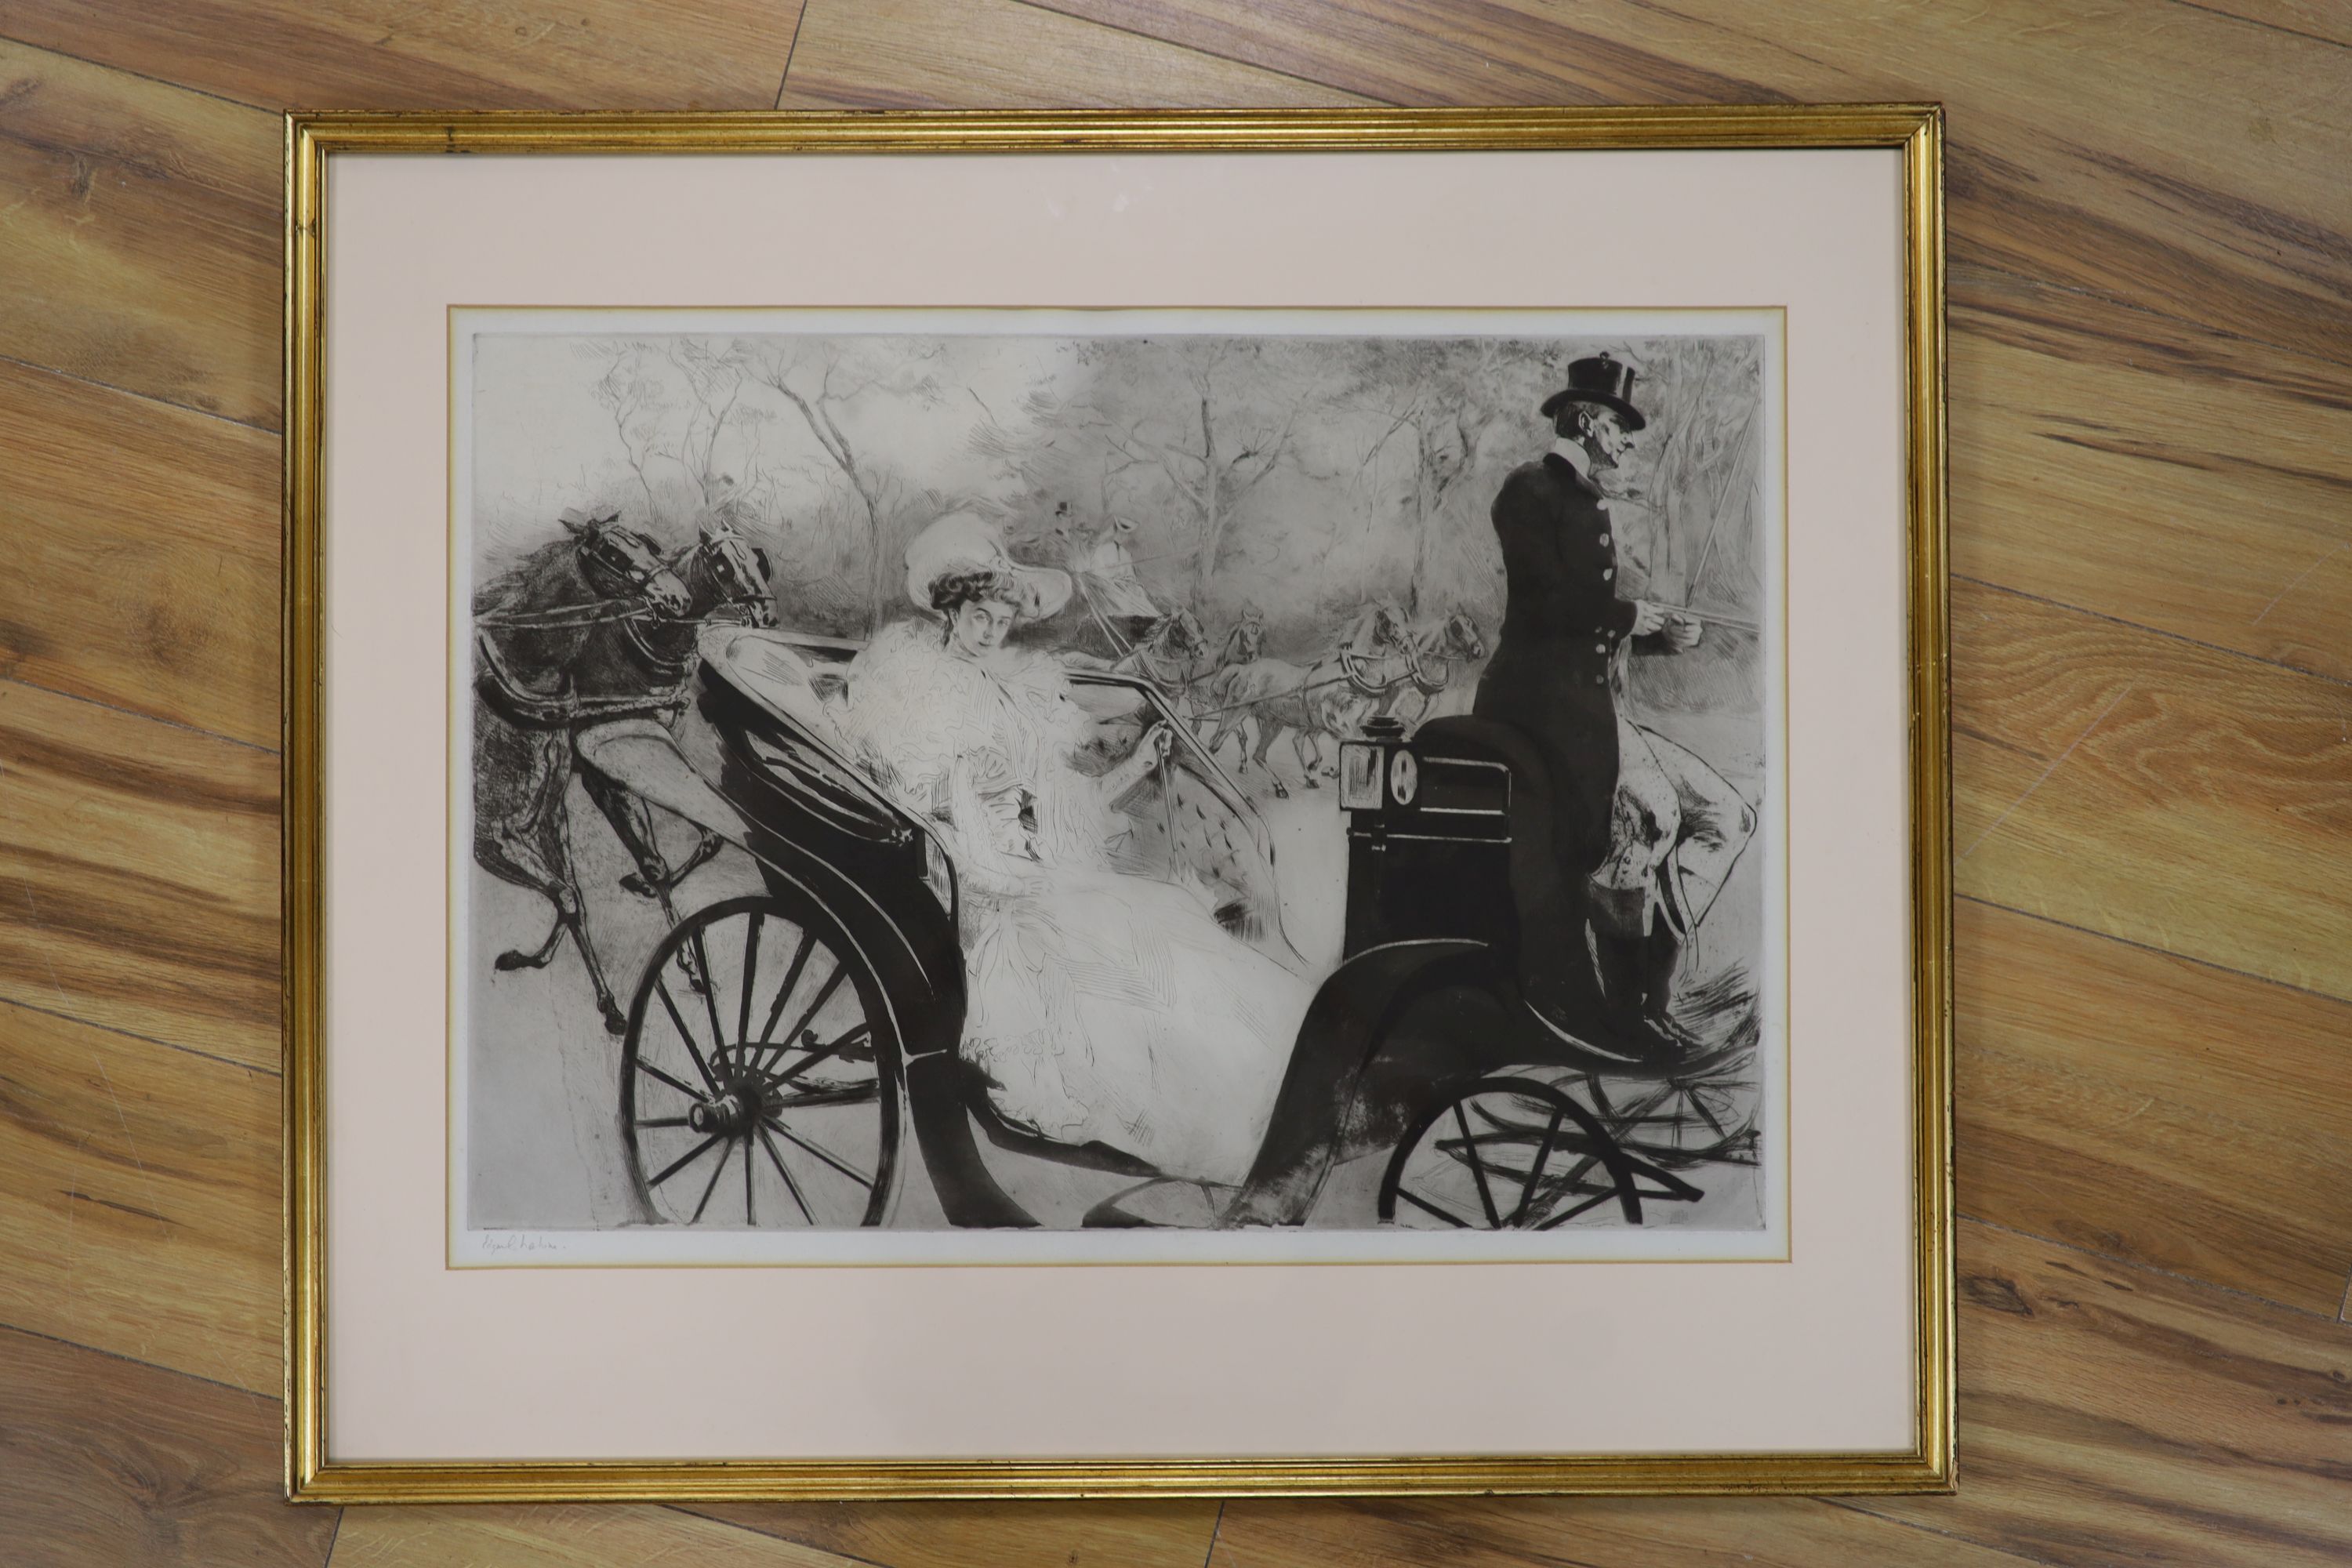 Edgar Chahine (1874-1947), drypoint etching, La Promenade, signed in pencil 1902, from the edition of 100, 46 x 66cm